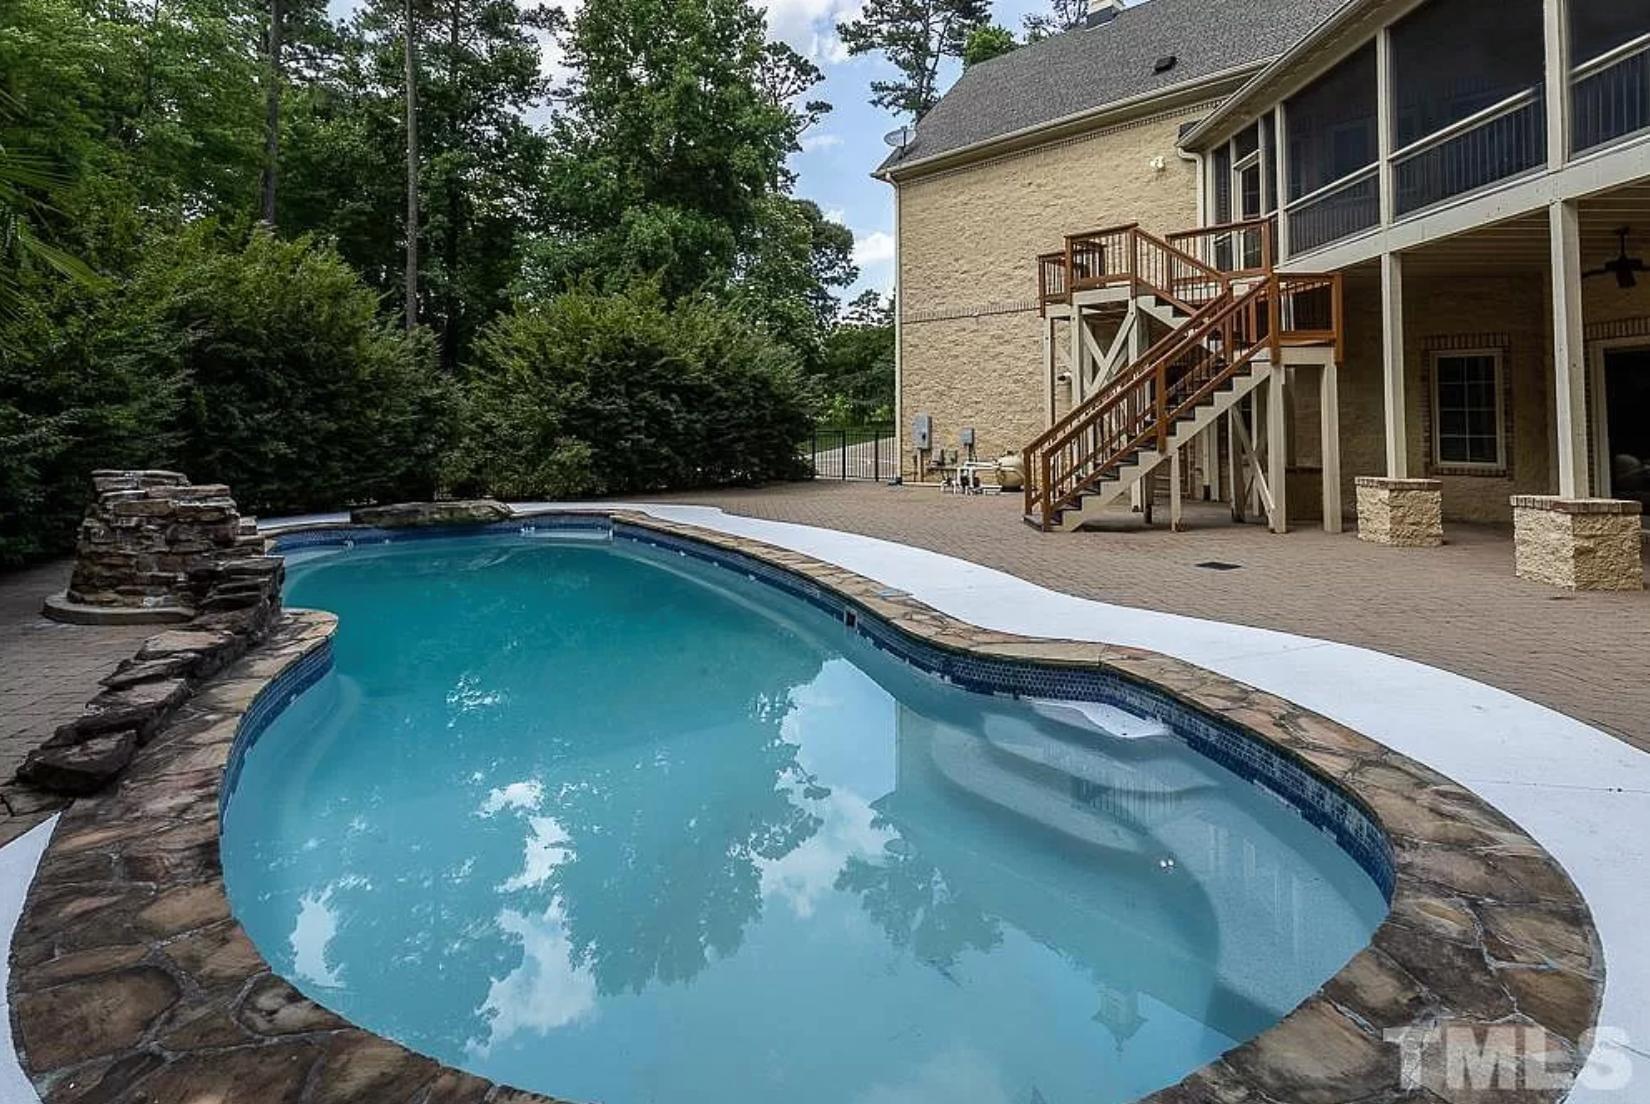 A blue pool near large, green trees and a gray, stone-faced home with a covered patio and screened-in porch